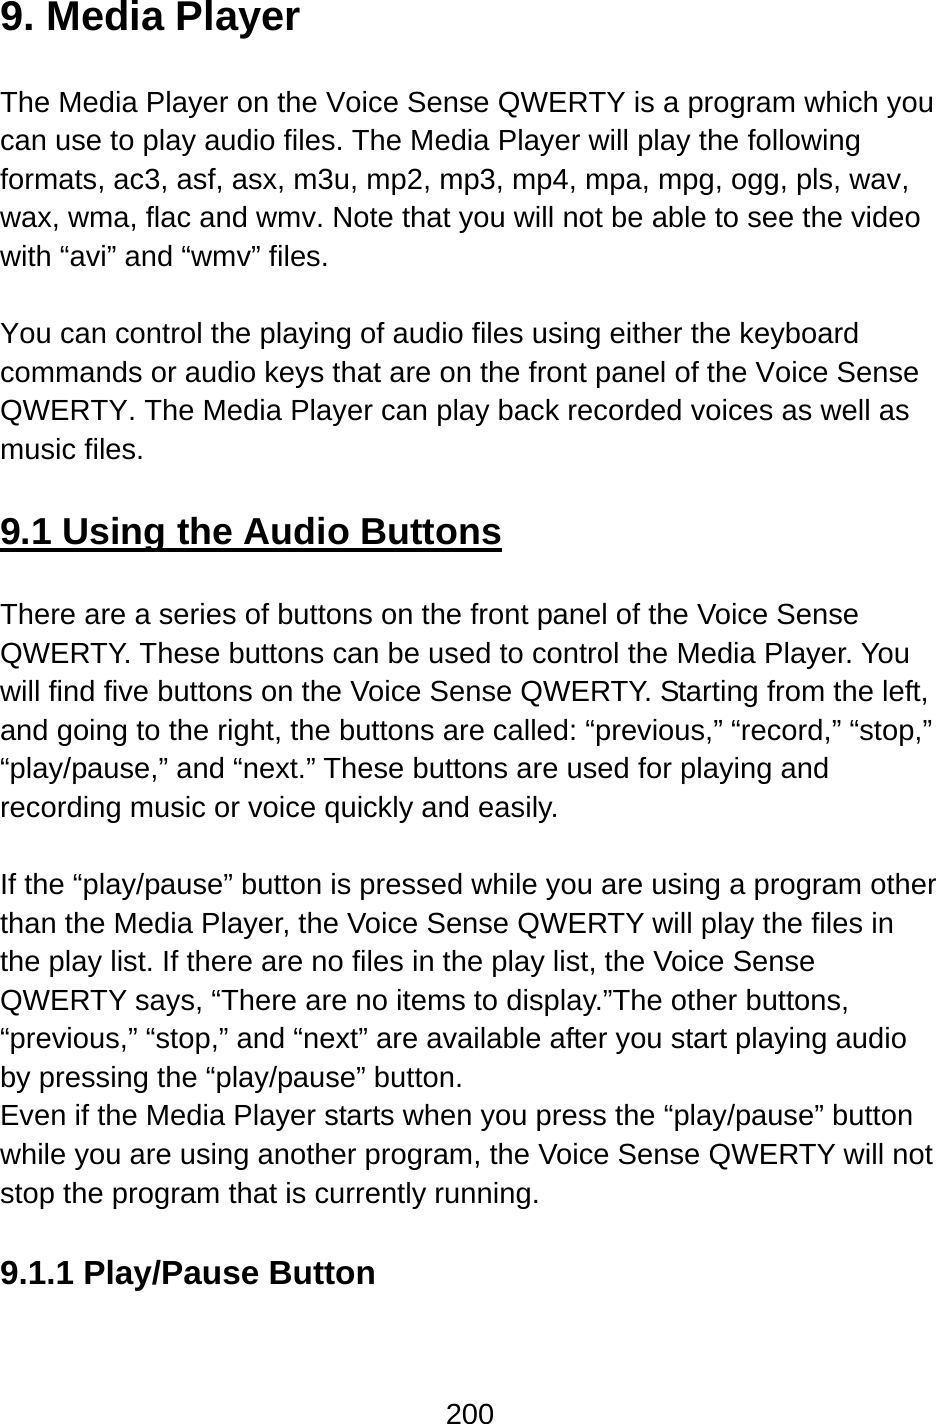 200  9. Media Player  The Media Player on the Voice Sense QWERTY is a program which you can use to play audio files. The Media Player will play the following formats, ac3, asf, asx, m3u, mp2, mp3, mp4, mpa, mpg, ogg, pls, wav, wax, wma, flac and wmv. Note that you will not be able to see the video with “avi” and “wmv” files.  You can control the playing of audio files using either the keyboard commands or audio keys that are on the front panel of the Voice Sense QWERTY. The Media Player can play back recorded voices as well as music files.  9.1 Using the Audio Buttons  There are a series of buttons on the front panel of the Voice Sense QWERTY. These buttons can be used to control the Media Player. You will find five buttons on the Voice Sense QWERTY. Starting from the left, and going to the right, the buttons are called: “previous,” “record,” “stop,” “play/pause,” and “next.” These buttons are used for playing and recording music or voice quickly and easily.  If the “play/pause” button is pressed while you are using a program other than the Media Player, the Voice Sense QWERTY will play the files in the play list. If there are no files in the play list, the Voice Sense QWERTY says, “There are no items to display.”The other buttons, “previous,” “stop,” and “next” are available after you start playing audio by pressing the “play/pause” button.   Even if the Media Player starts when you press the “play/pause” button while you are using another program, the Voice Sense QWERTY will not stop the program that is currently running.  9.1.1 Play/Pause Button  